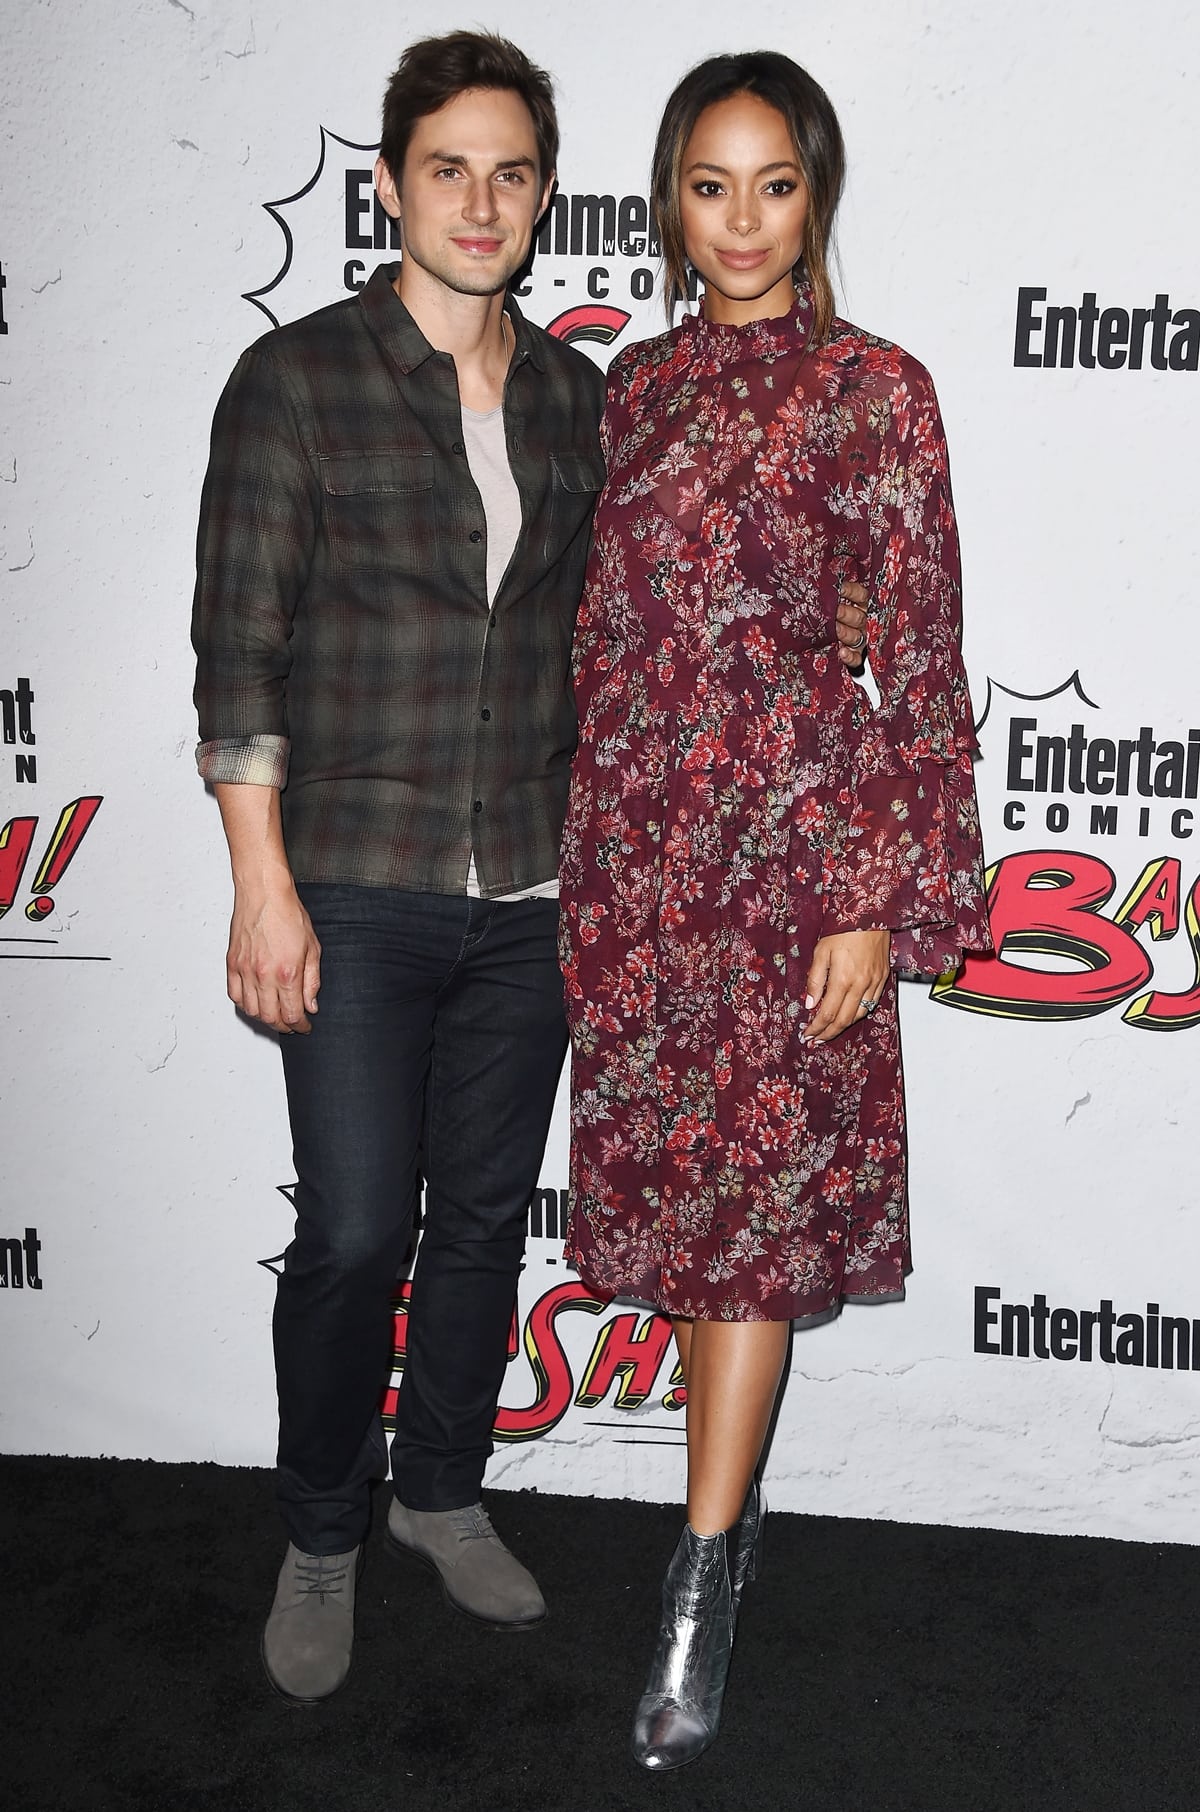 Joined by her husband Andrew J. West, Amber Stevens West wore a floral print IRO long-sleeve dress at Entertainment Weekly's annual Comic-Con party